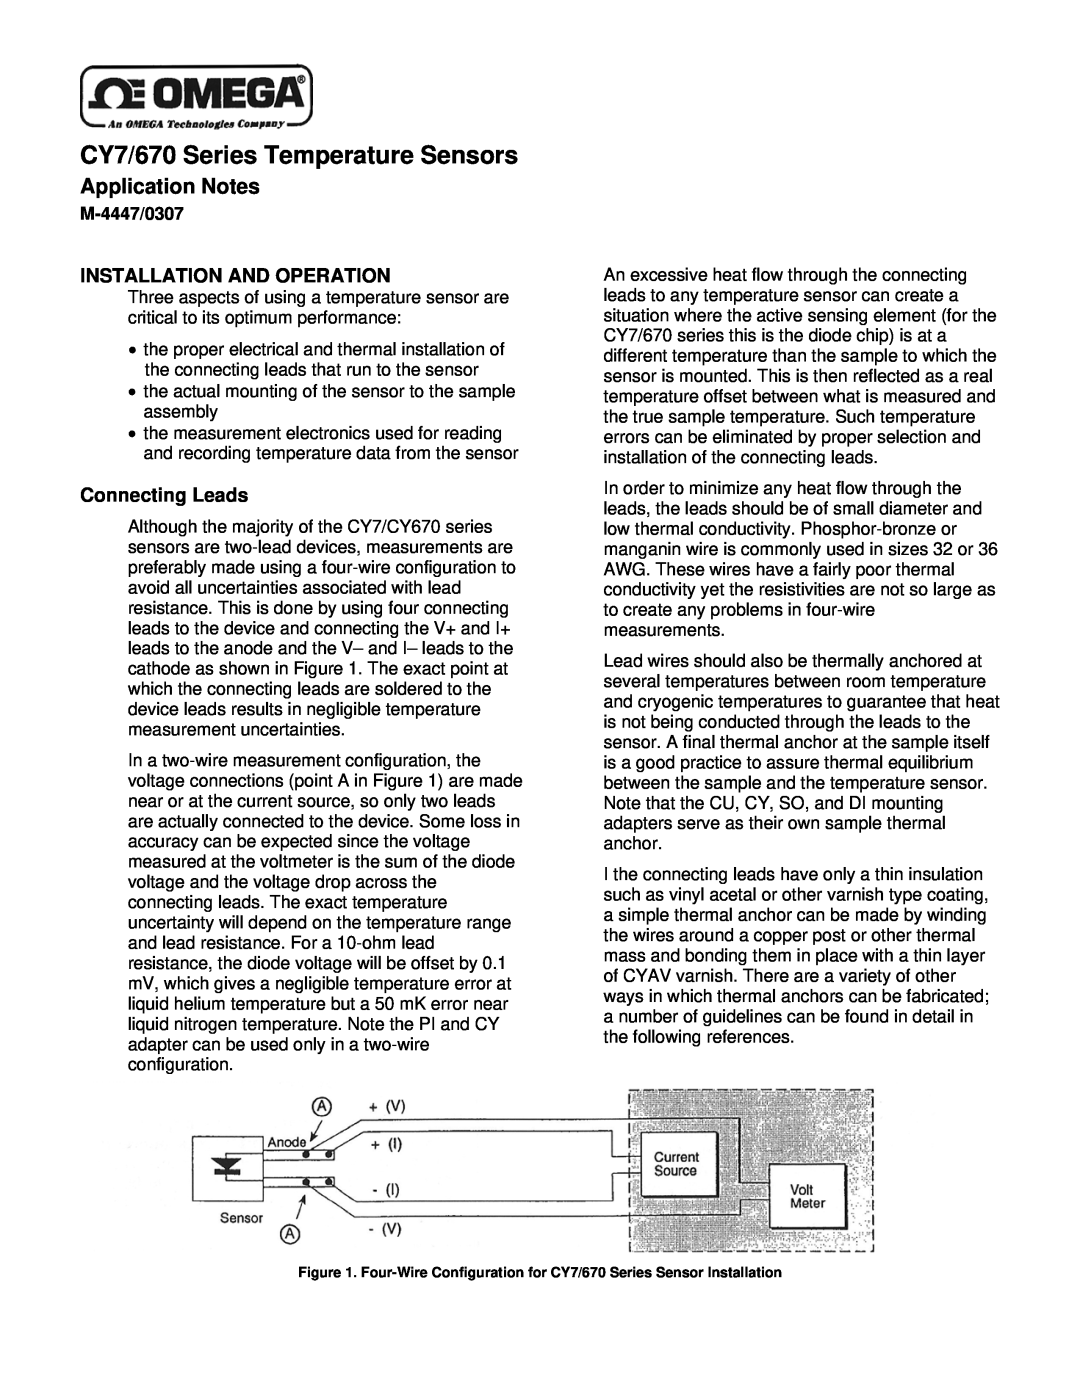 Omega Speaker Systems CY670 Series manual Application Notes, Installation And Operation, Connecting Leads, M-4447/0307 